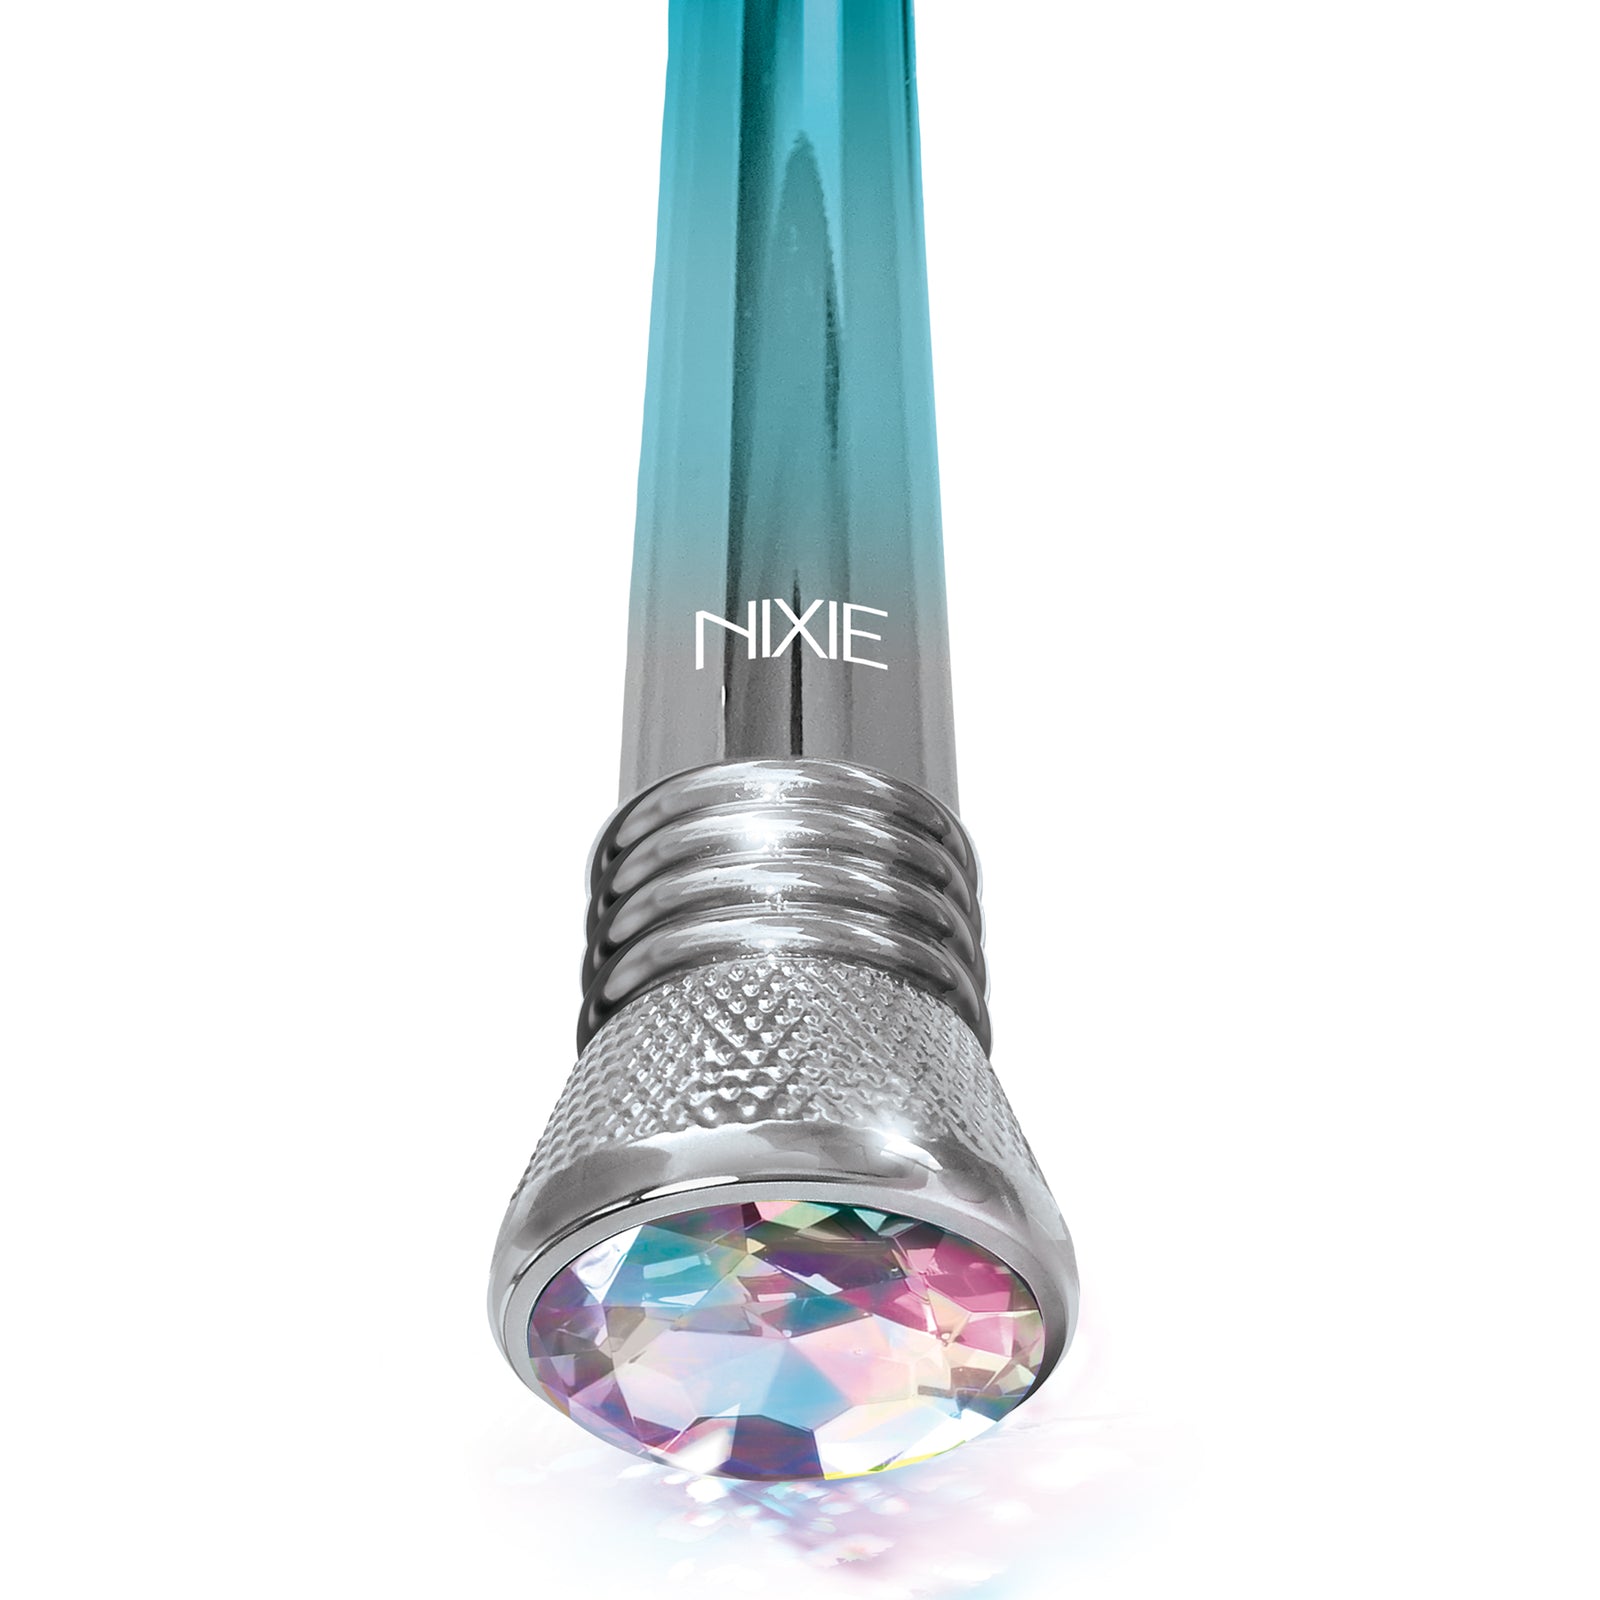 Nixie Jewel Ombre Bulb Vibe, 10 Function, Blue Glow w/storage bag - THES